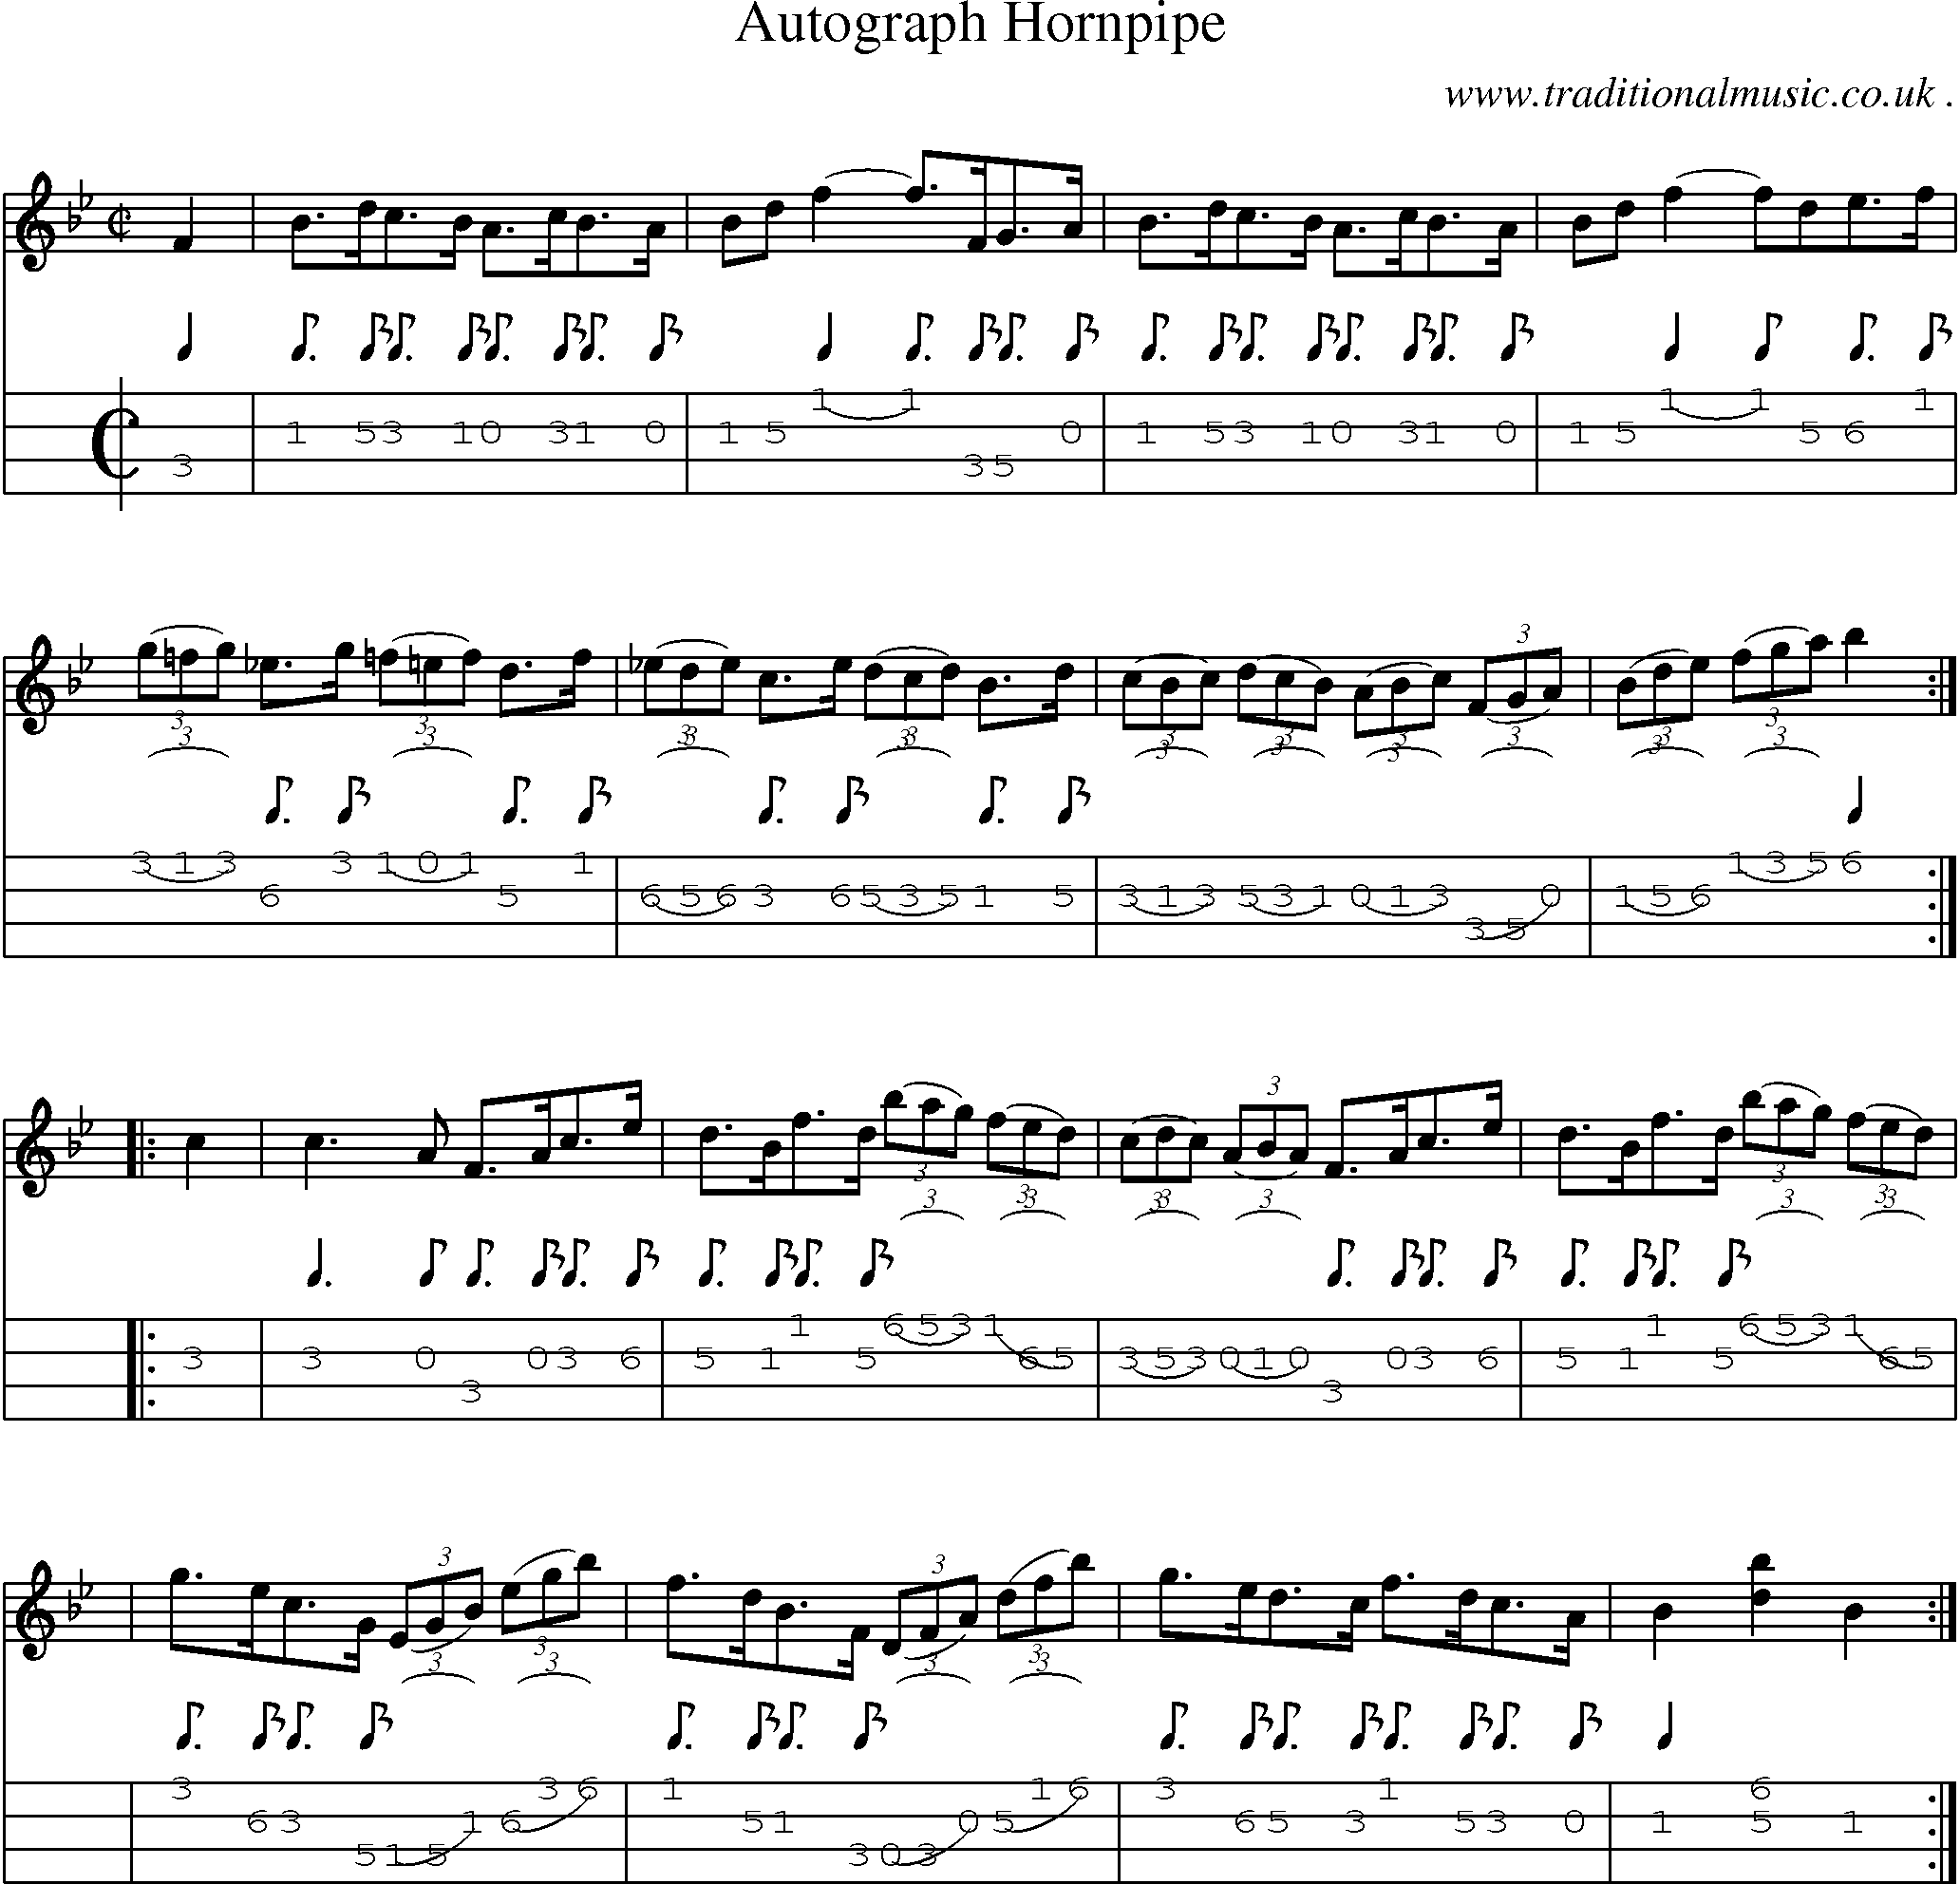 Sheet-Music and Mandolin Tabs for Autograph Hornpipe